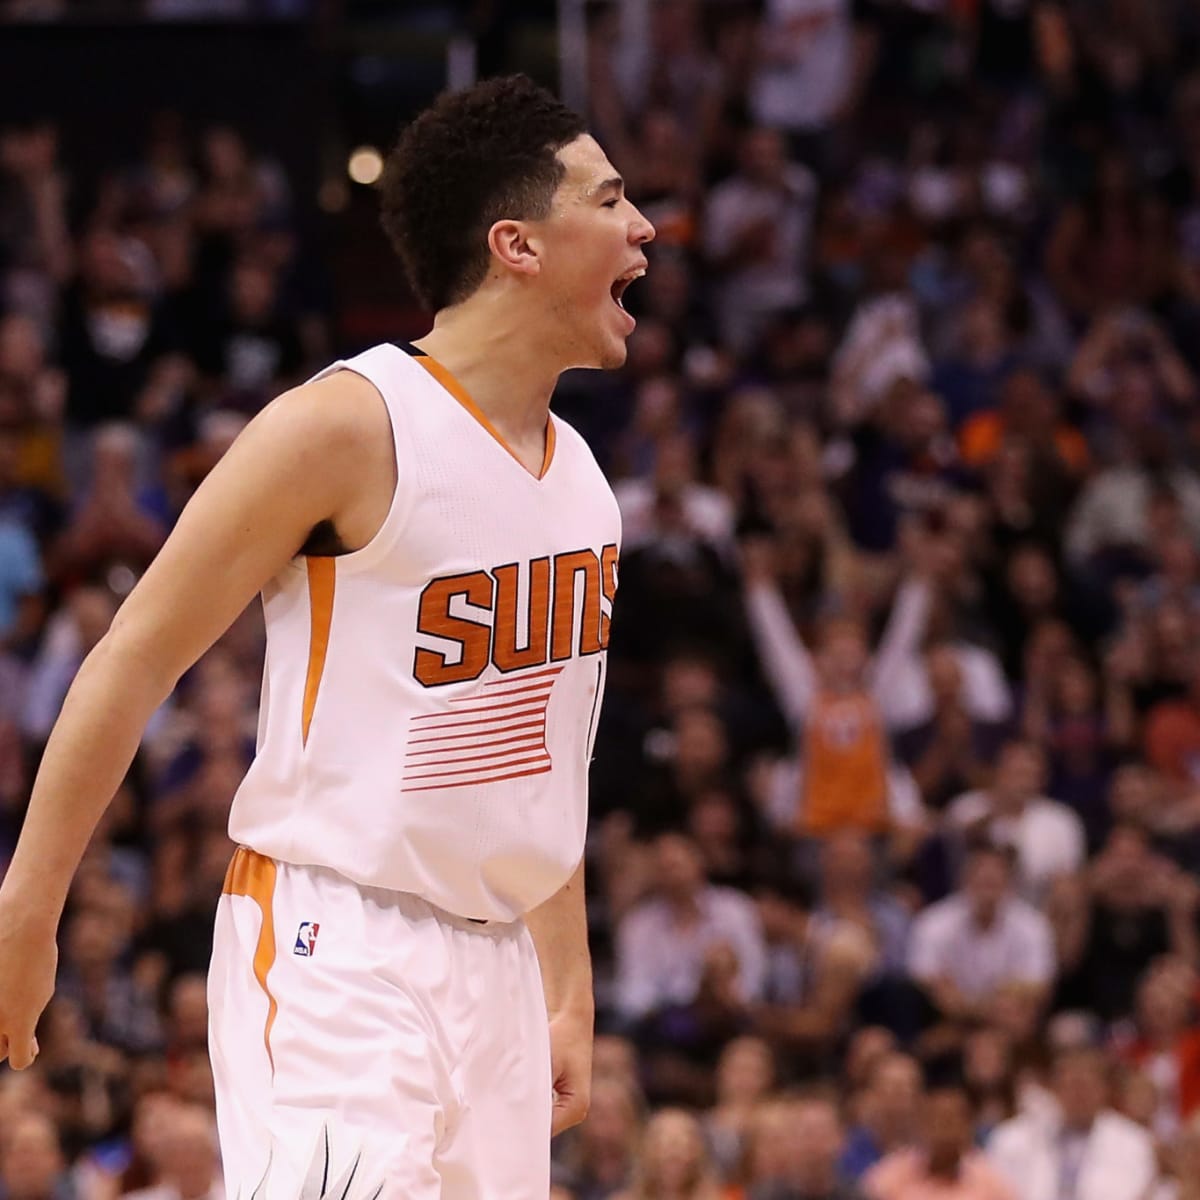 20th (joint): devin booker. $158,253,000 for five